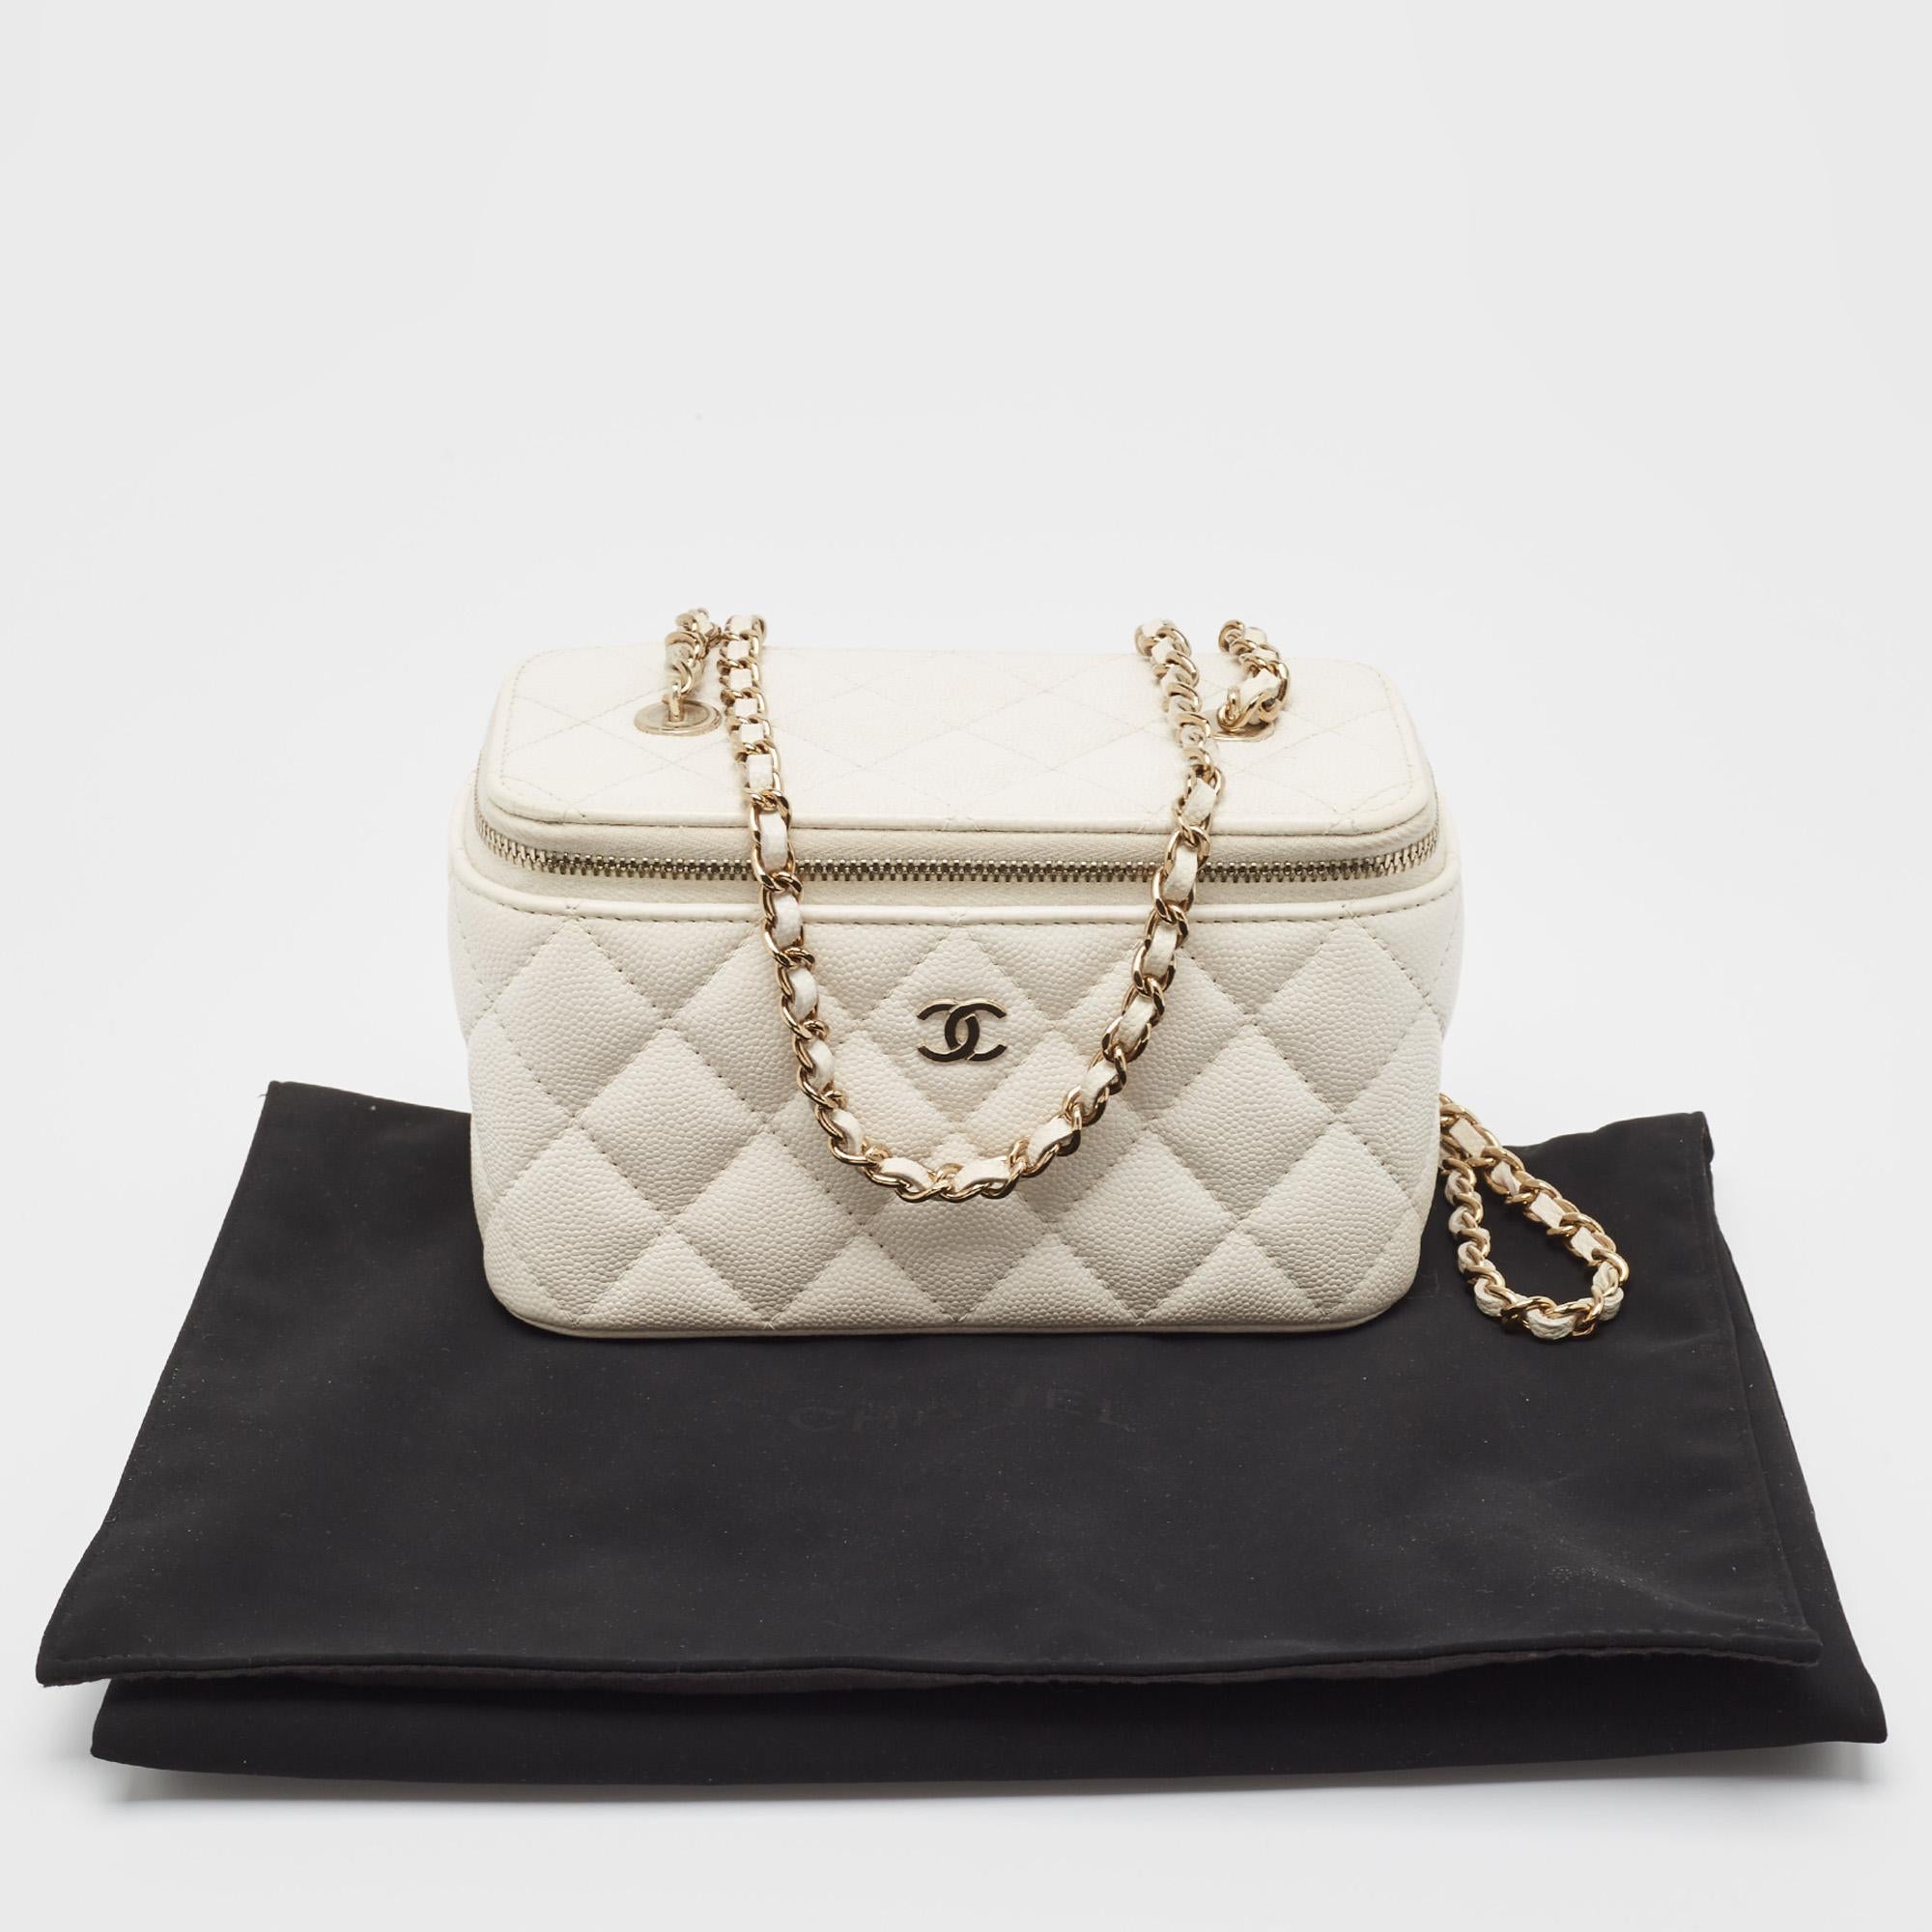 Chanel White Quilted Caviar Leather Small CC Vanity Case Bag 10